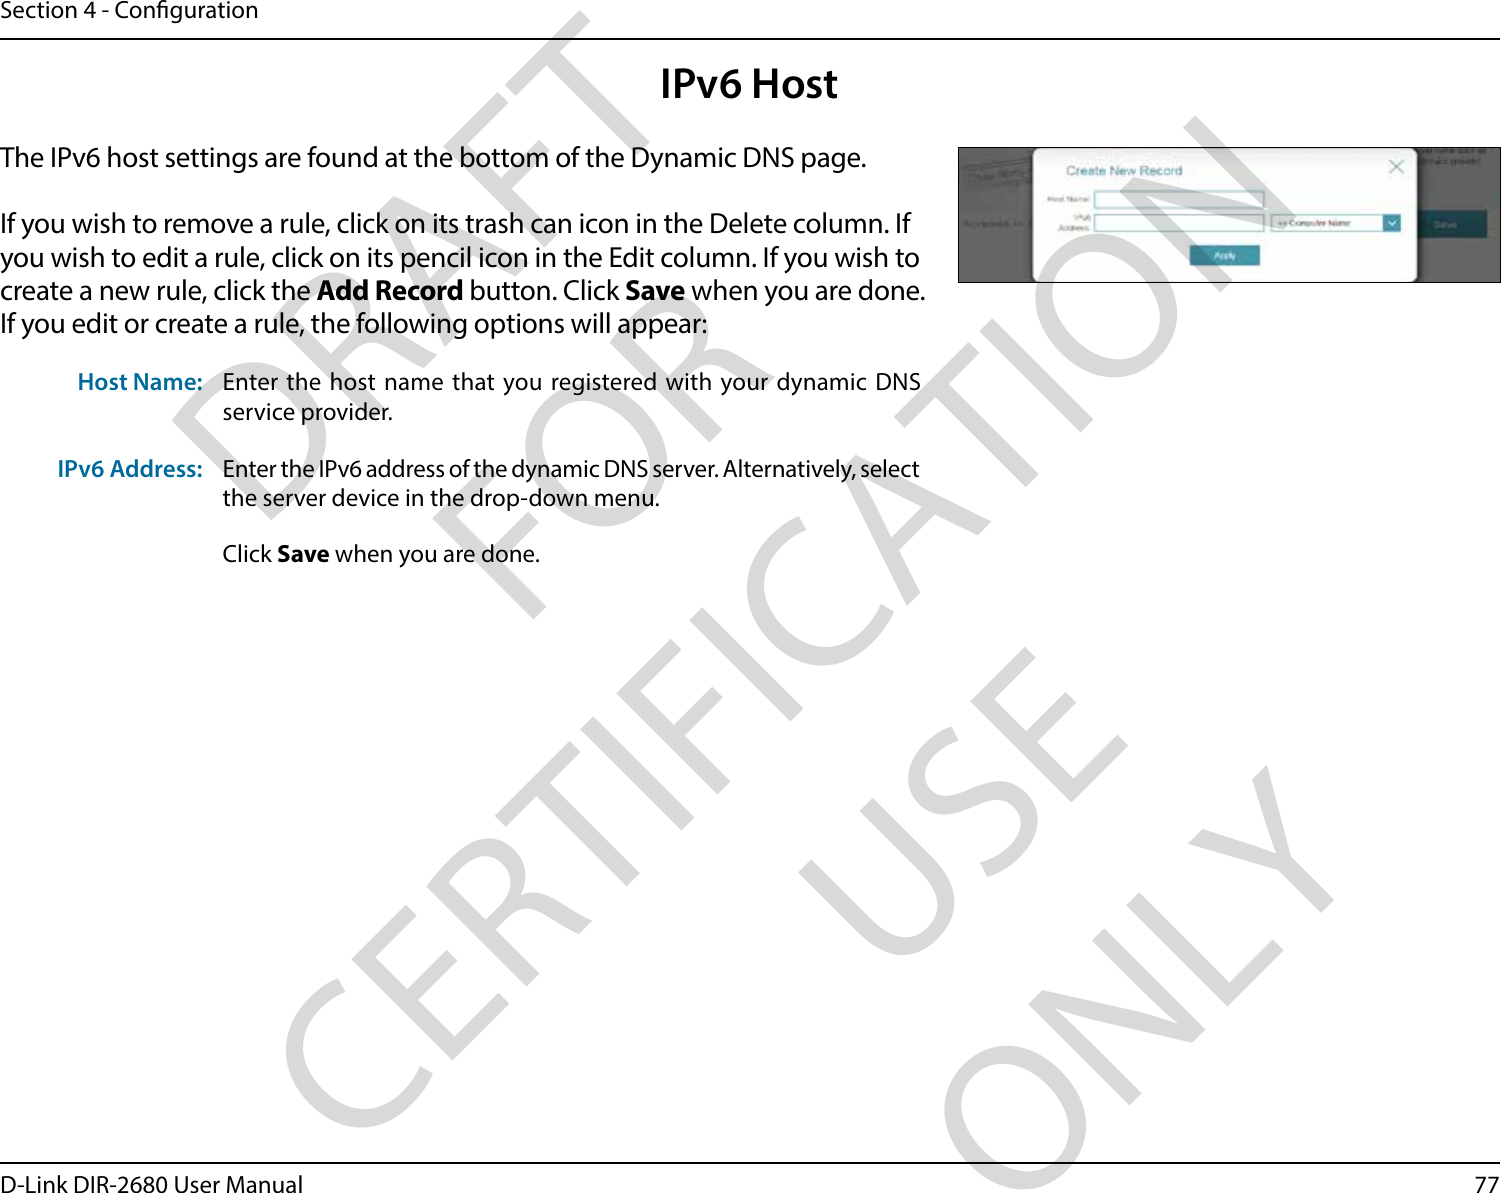 77D-Link DIR-2680 User ManualSection 4 - CongurationIPv6 HostThe IPv6 host settings are found at the bottom of the Dynamic DNS page.If you wish to remove a rule, click on its trash can icon in the Delete column. If you wish to edit a rule, click on its pencil icon in the Edit column. If you wish to create a new rule, click the Add Record button. Click Save when you are done. If you edit or create a rule, the following options will appear:Host Name: Enter the host name that you registered with your dynamic DNS service provider.IPv6 Address: Enter the IPv6 address of the dynamic DNS server. Alternatively, select the server device in the drop-down menu. Click Save when you are done.DRAFT FOR CERTIFICATION USE ONLY